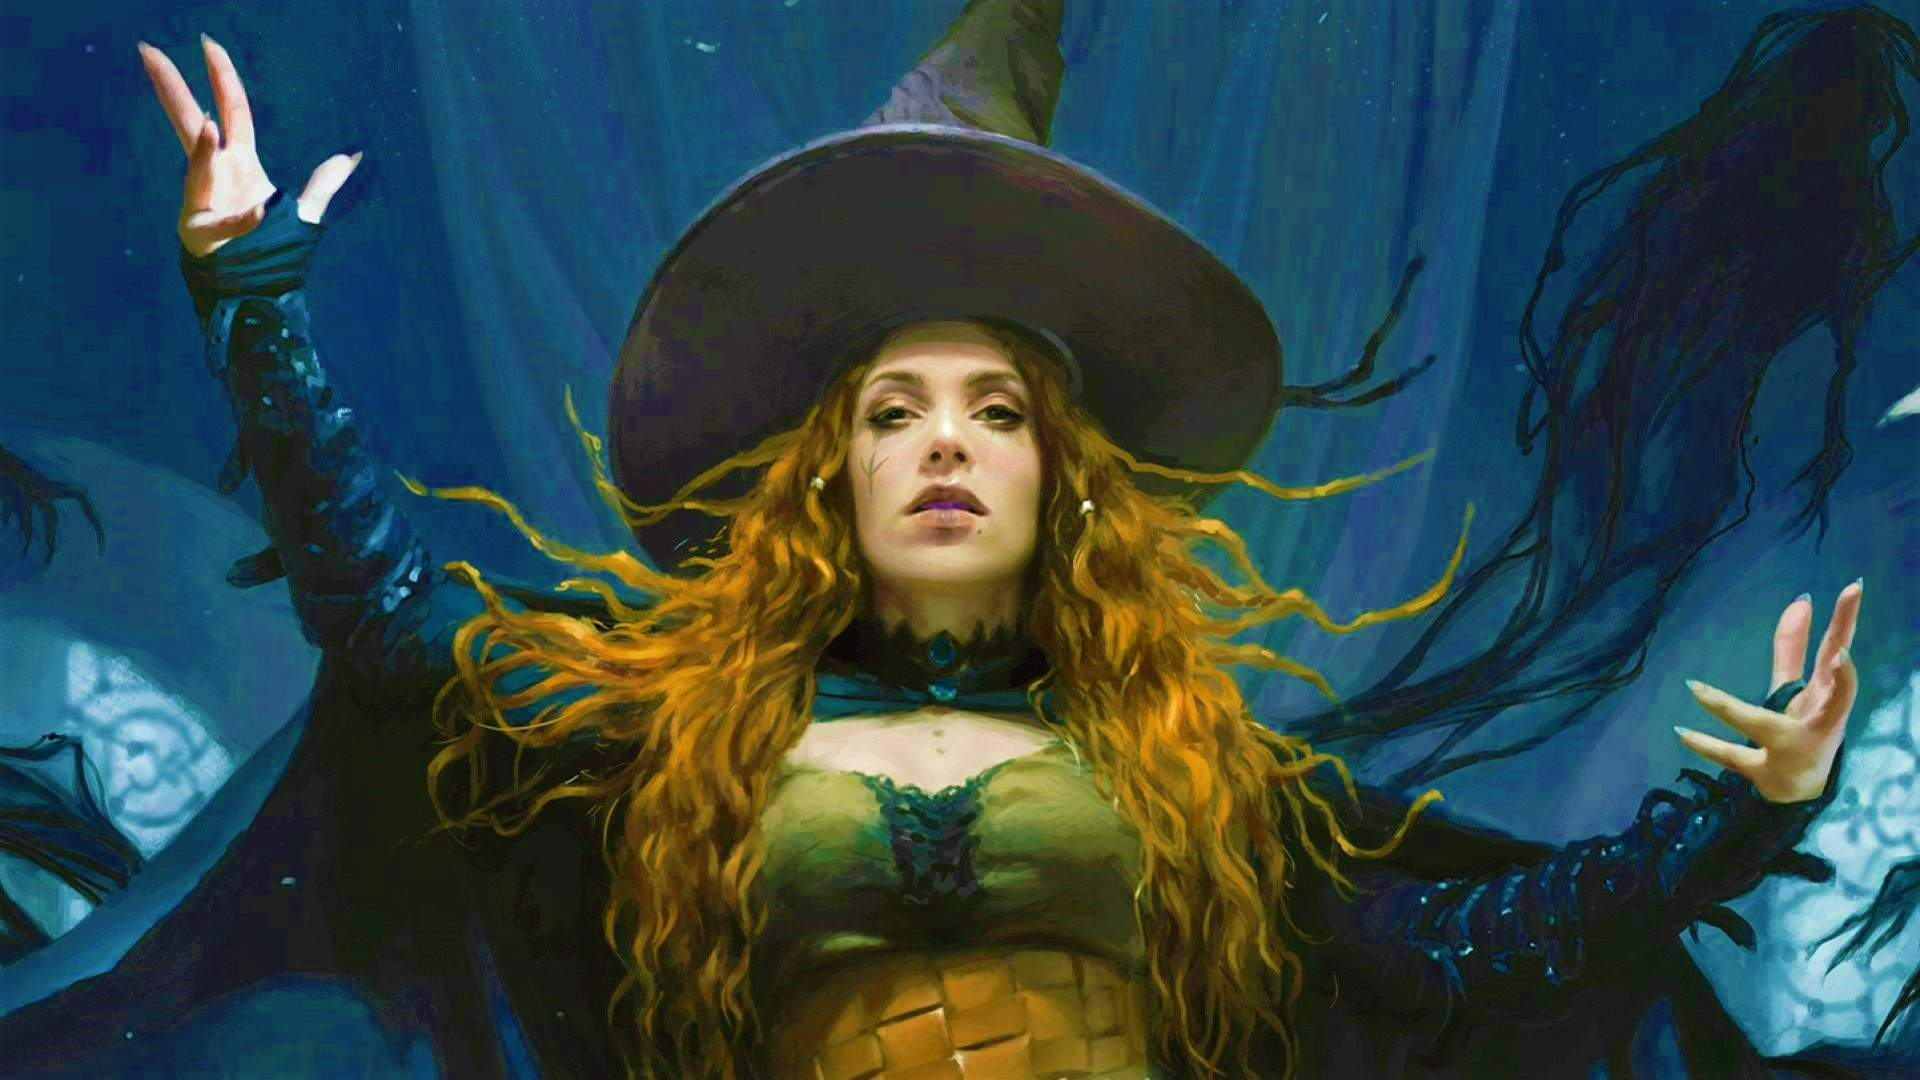 Tasha, a white, red-headed witch in a black hat and cloak, faces the viewer with outstretched arms in a spellcasting pose